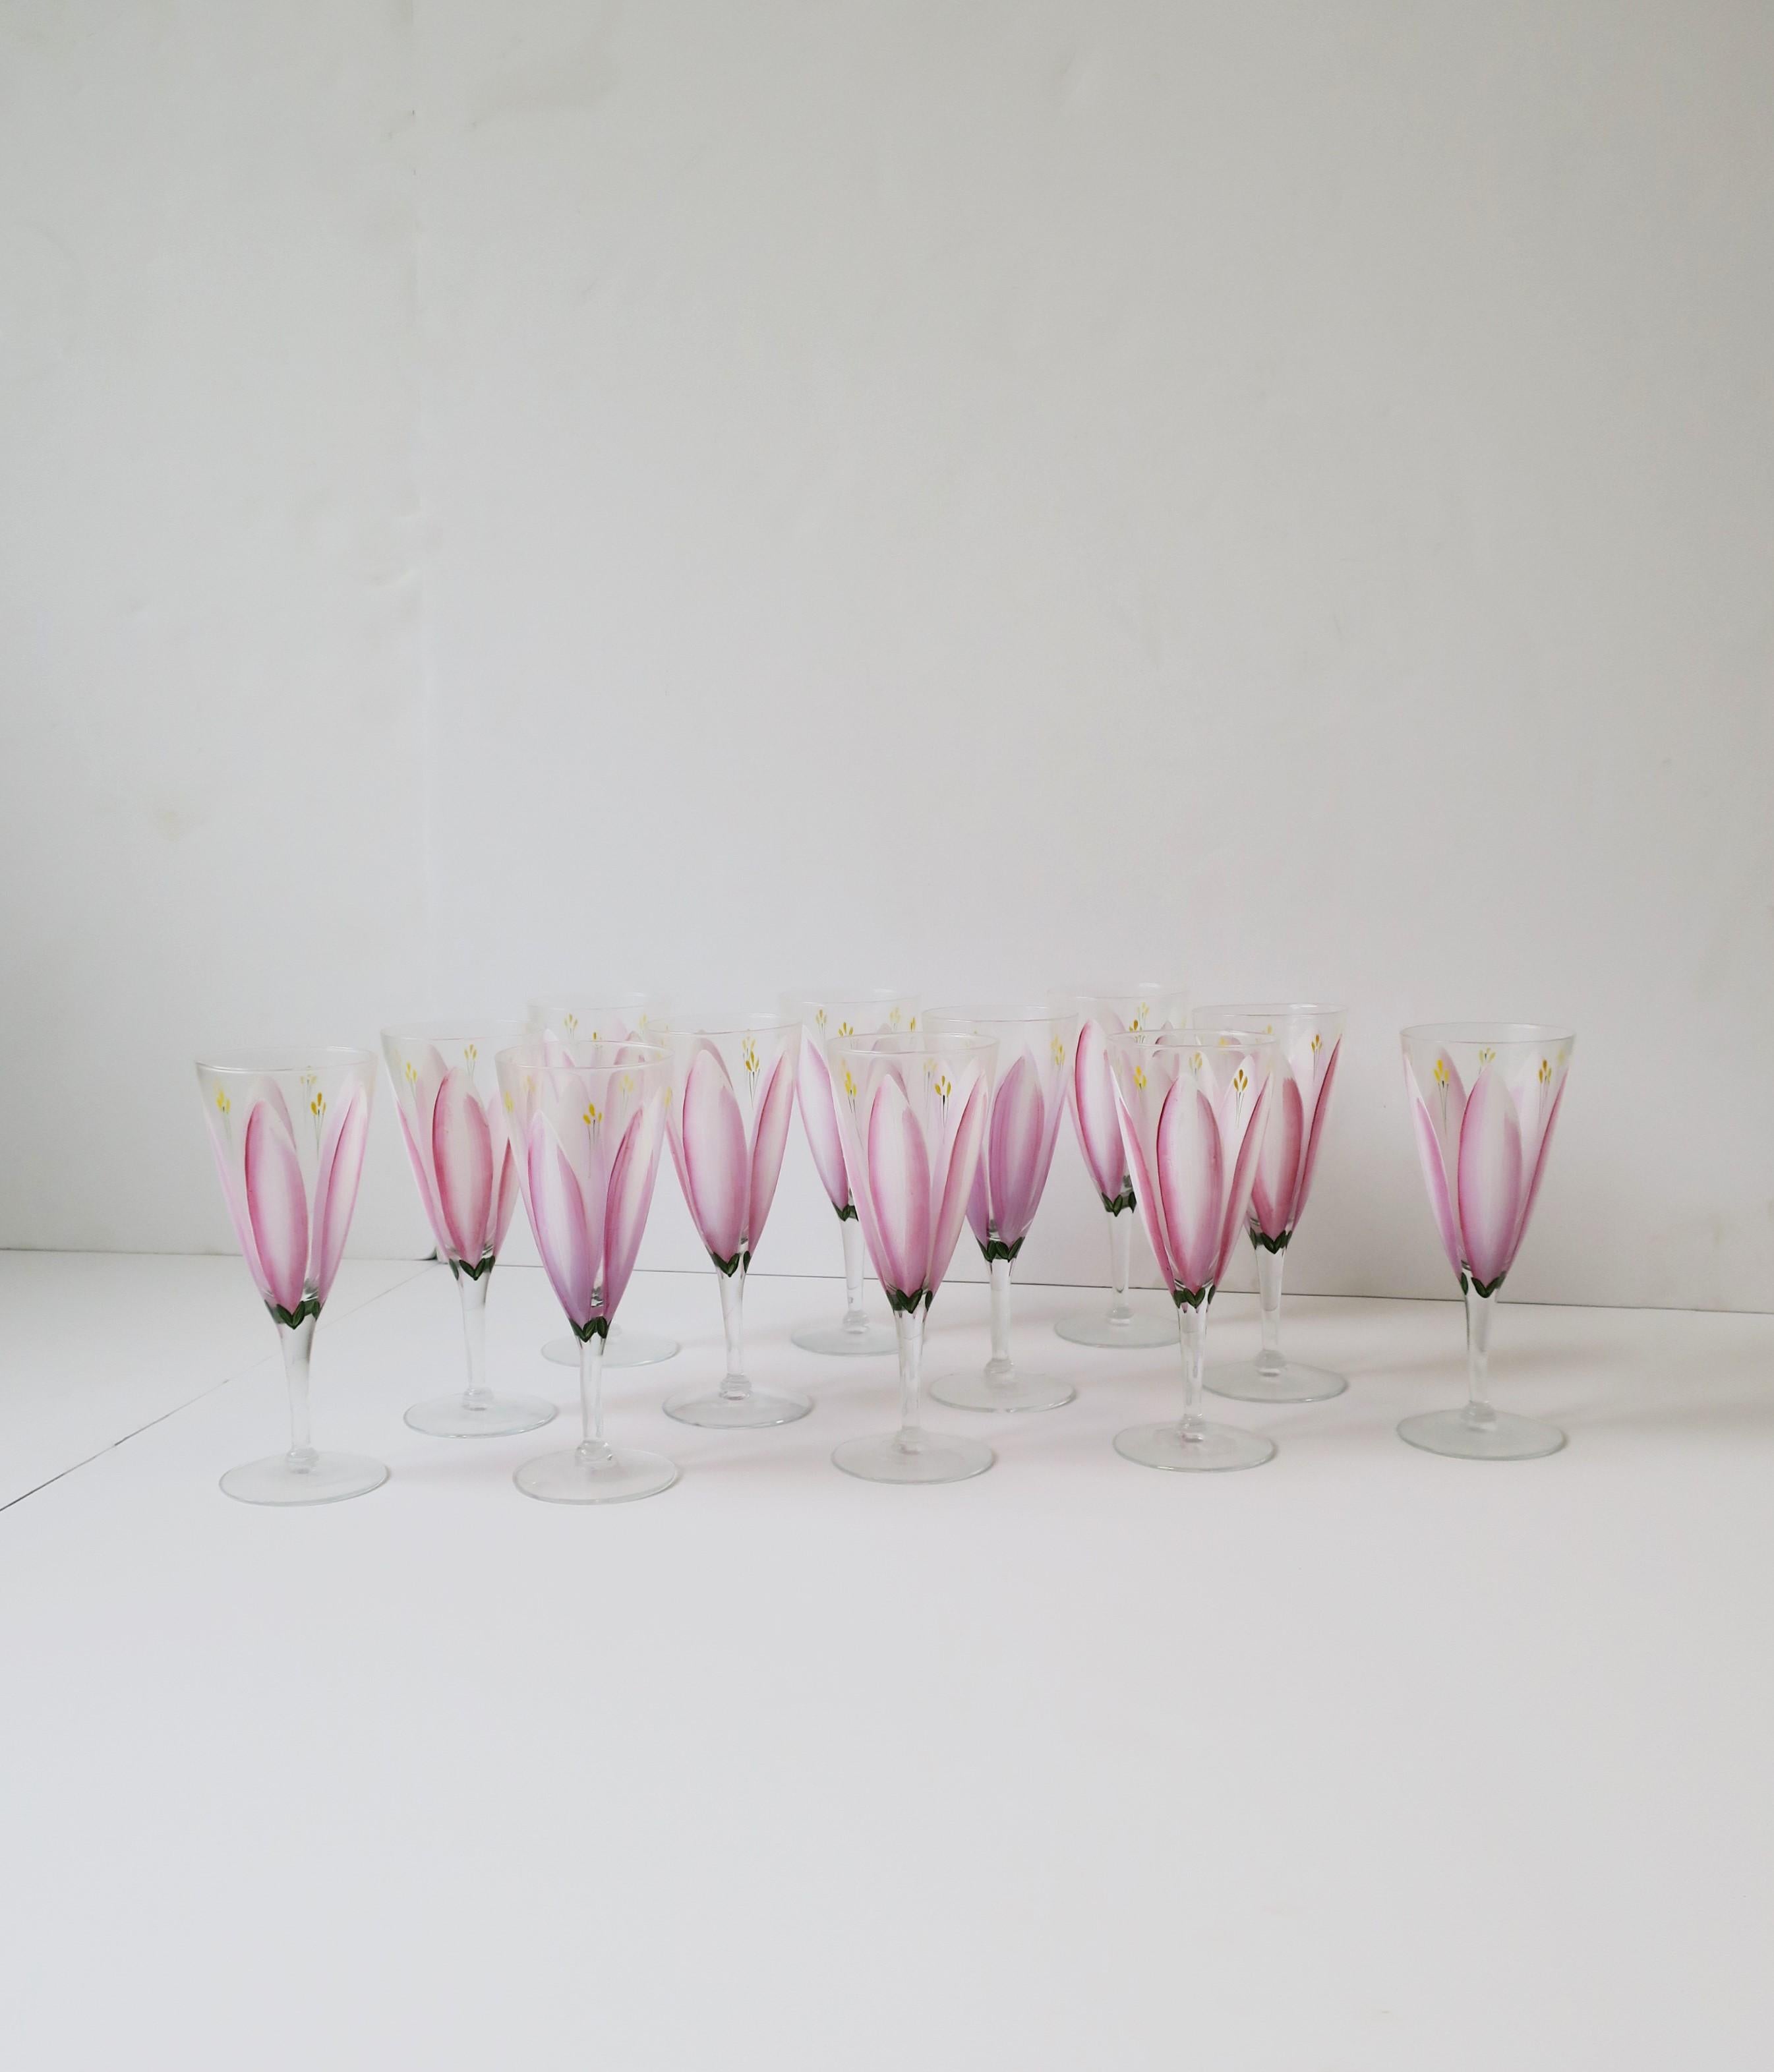 European Champagne Flutes Glasses Hand Painted Pink Tulip Flower Design, Set of 12 For Sale